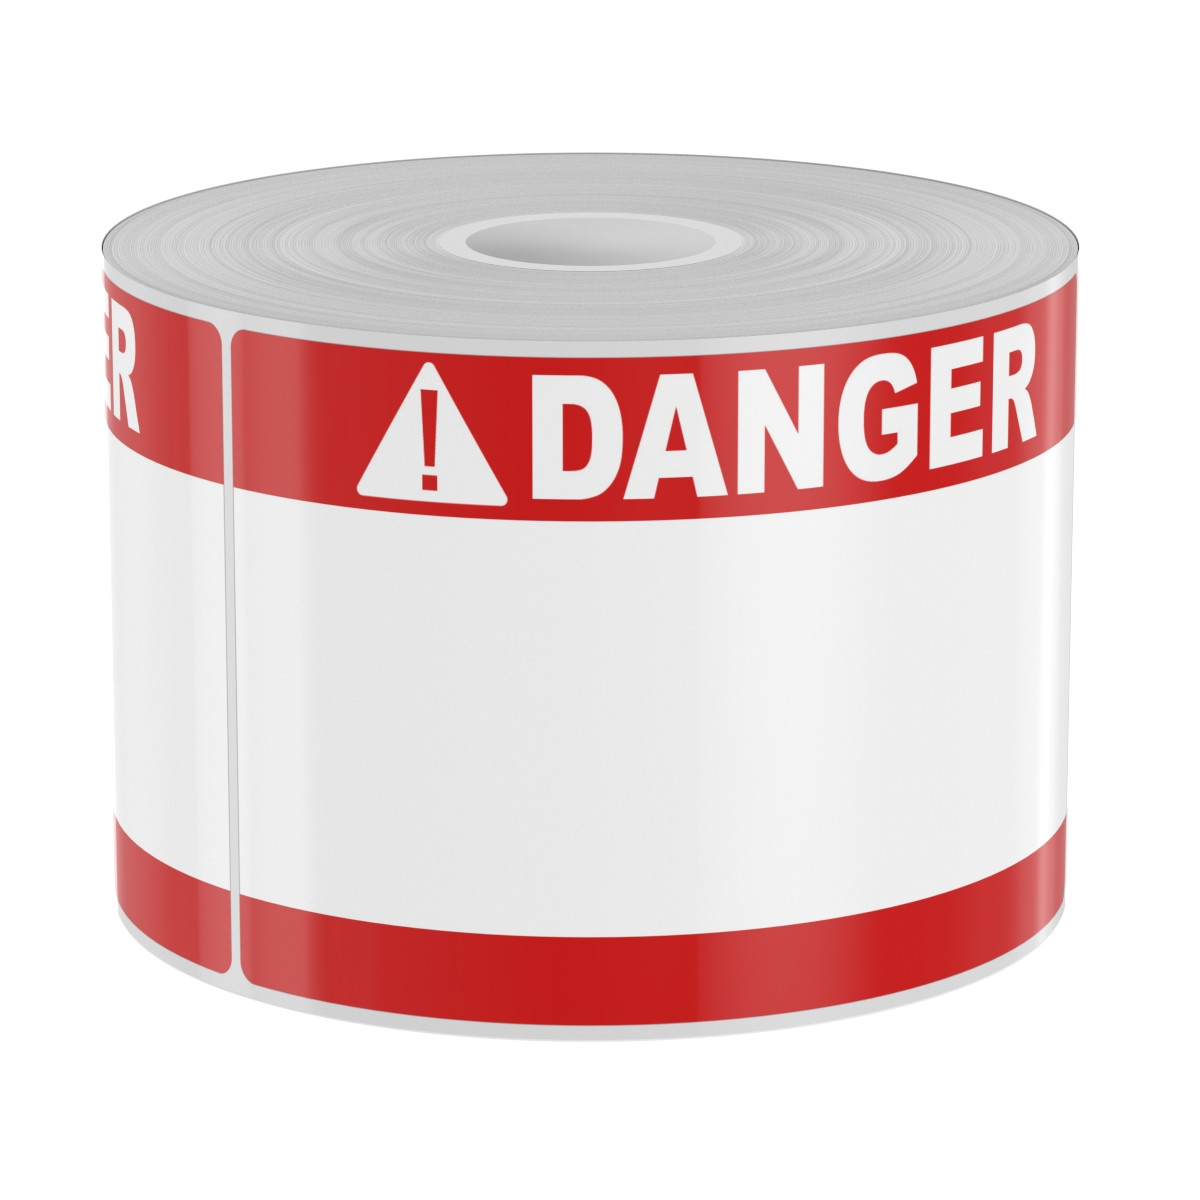 Detail view for 250 3" x 5" High-Performance Die-Cut Red Double Band White Danger